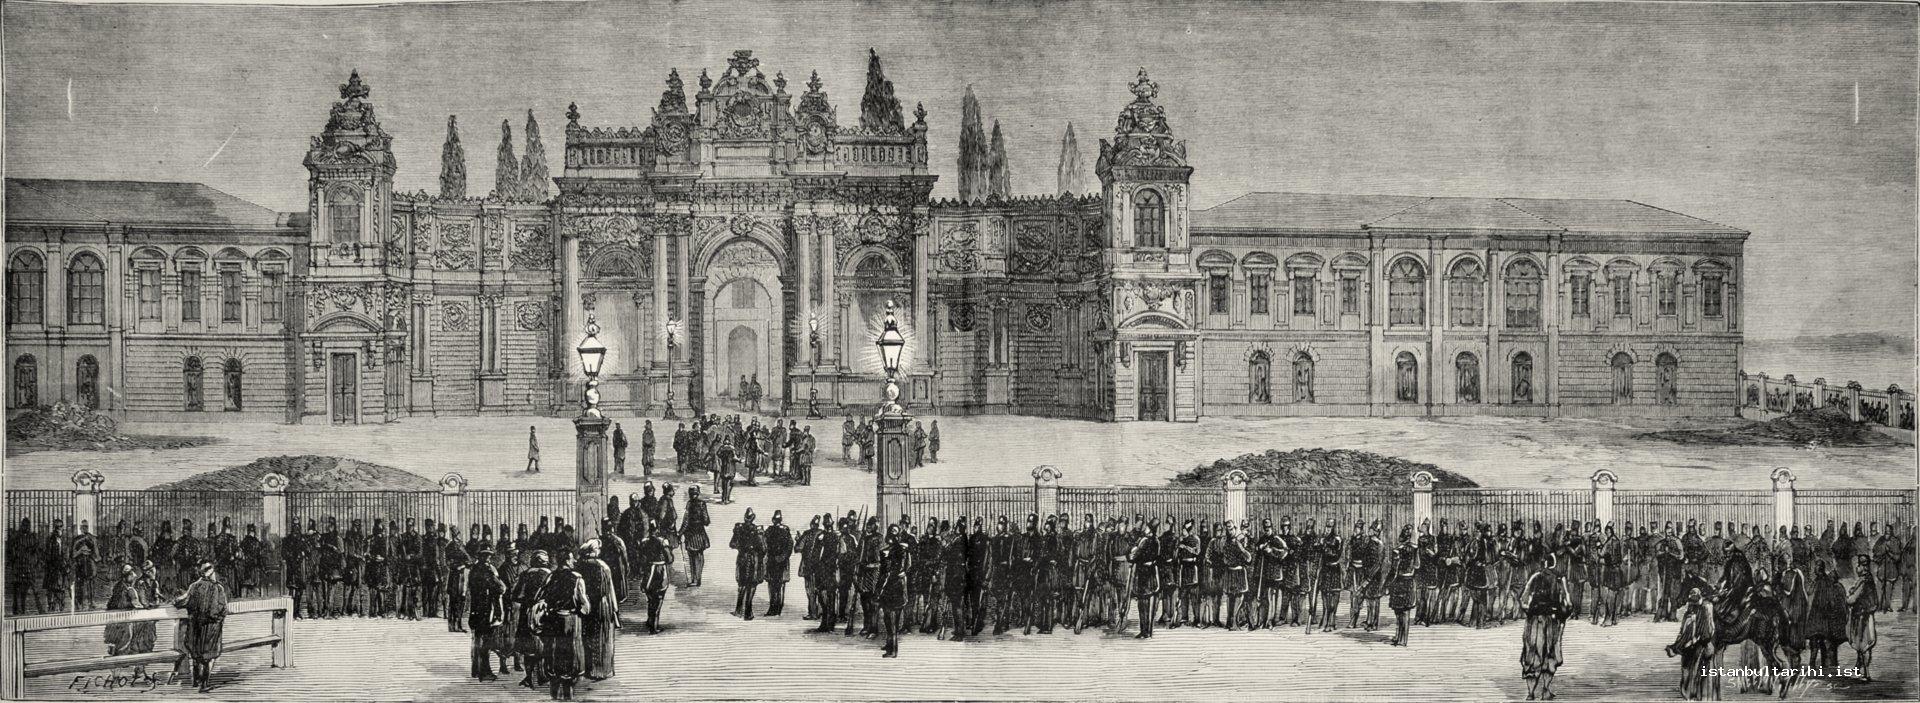 24a- Sultan Abdülaziz’s dethronement and his transfer from Dolmabahçe Palace to Topkapı Palace